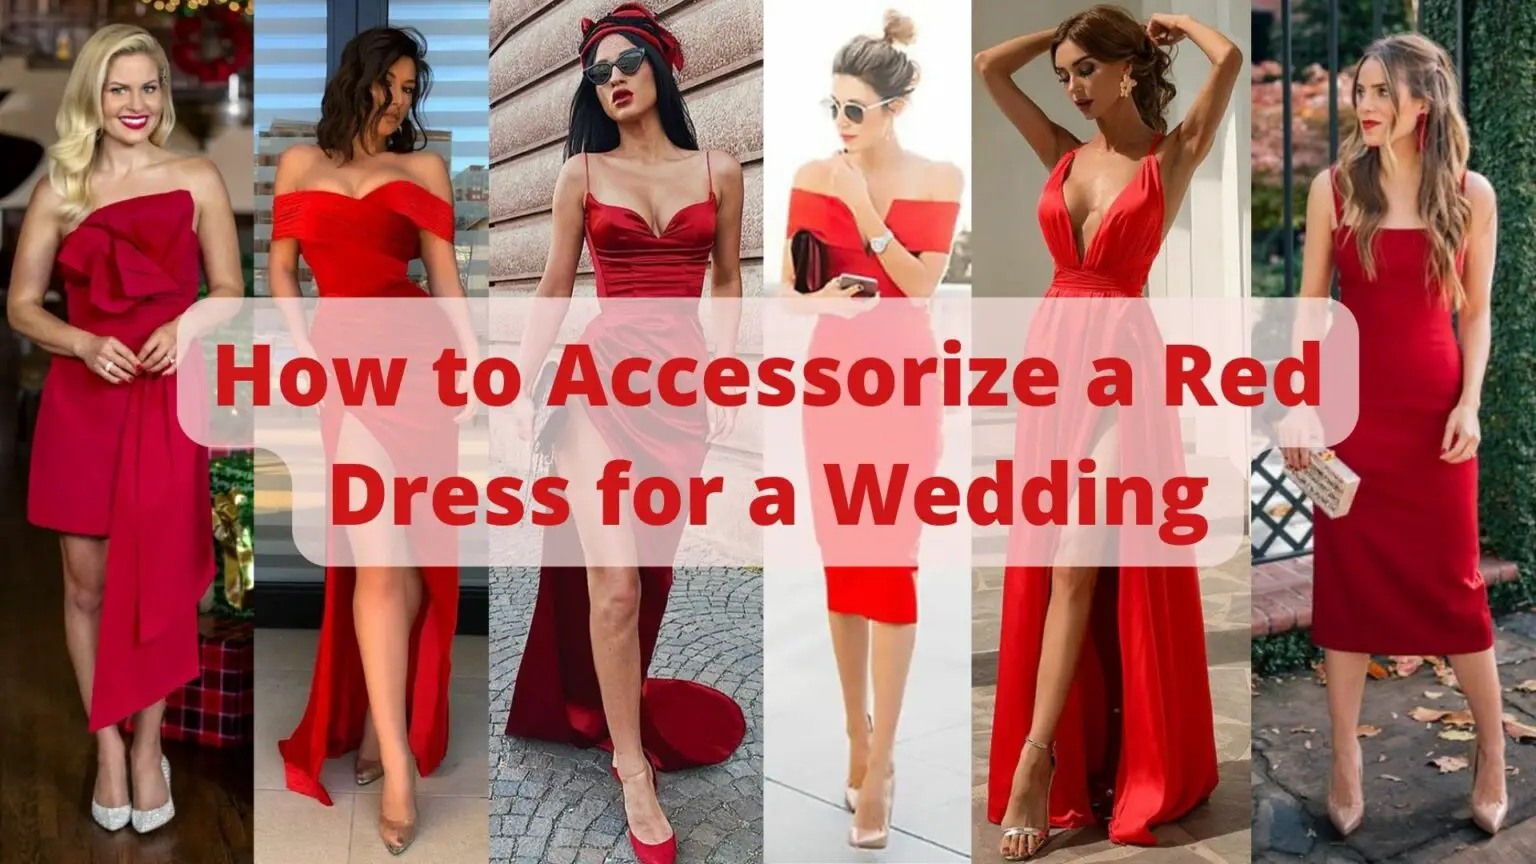 How to Accessorize a Red Dress for a Wedding | 10 Best Ways